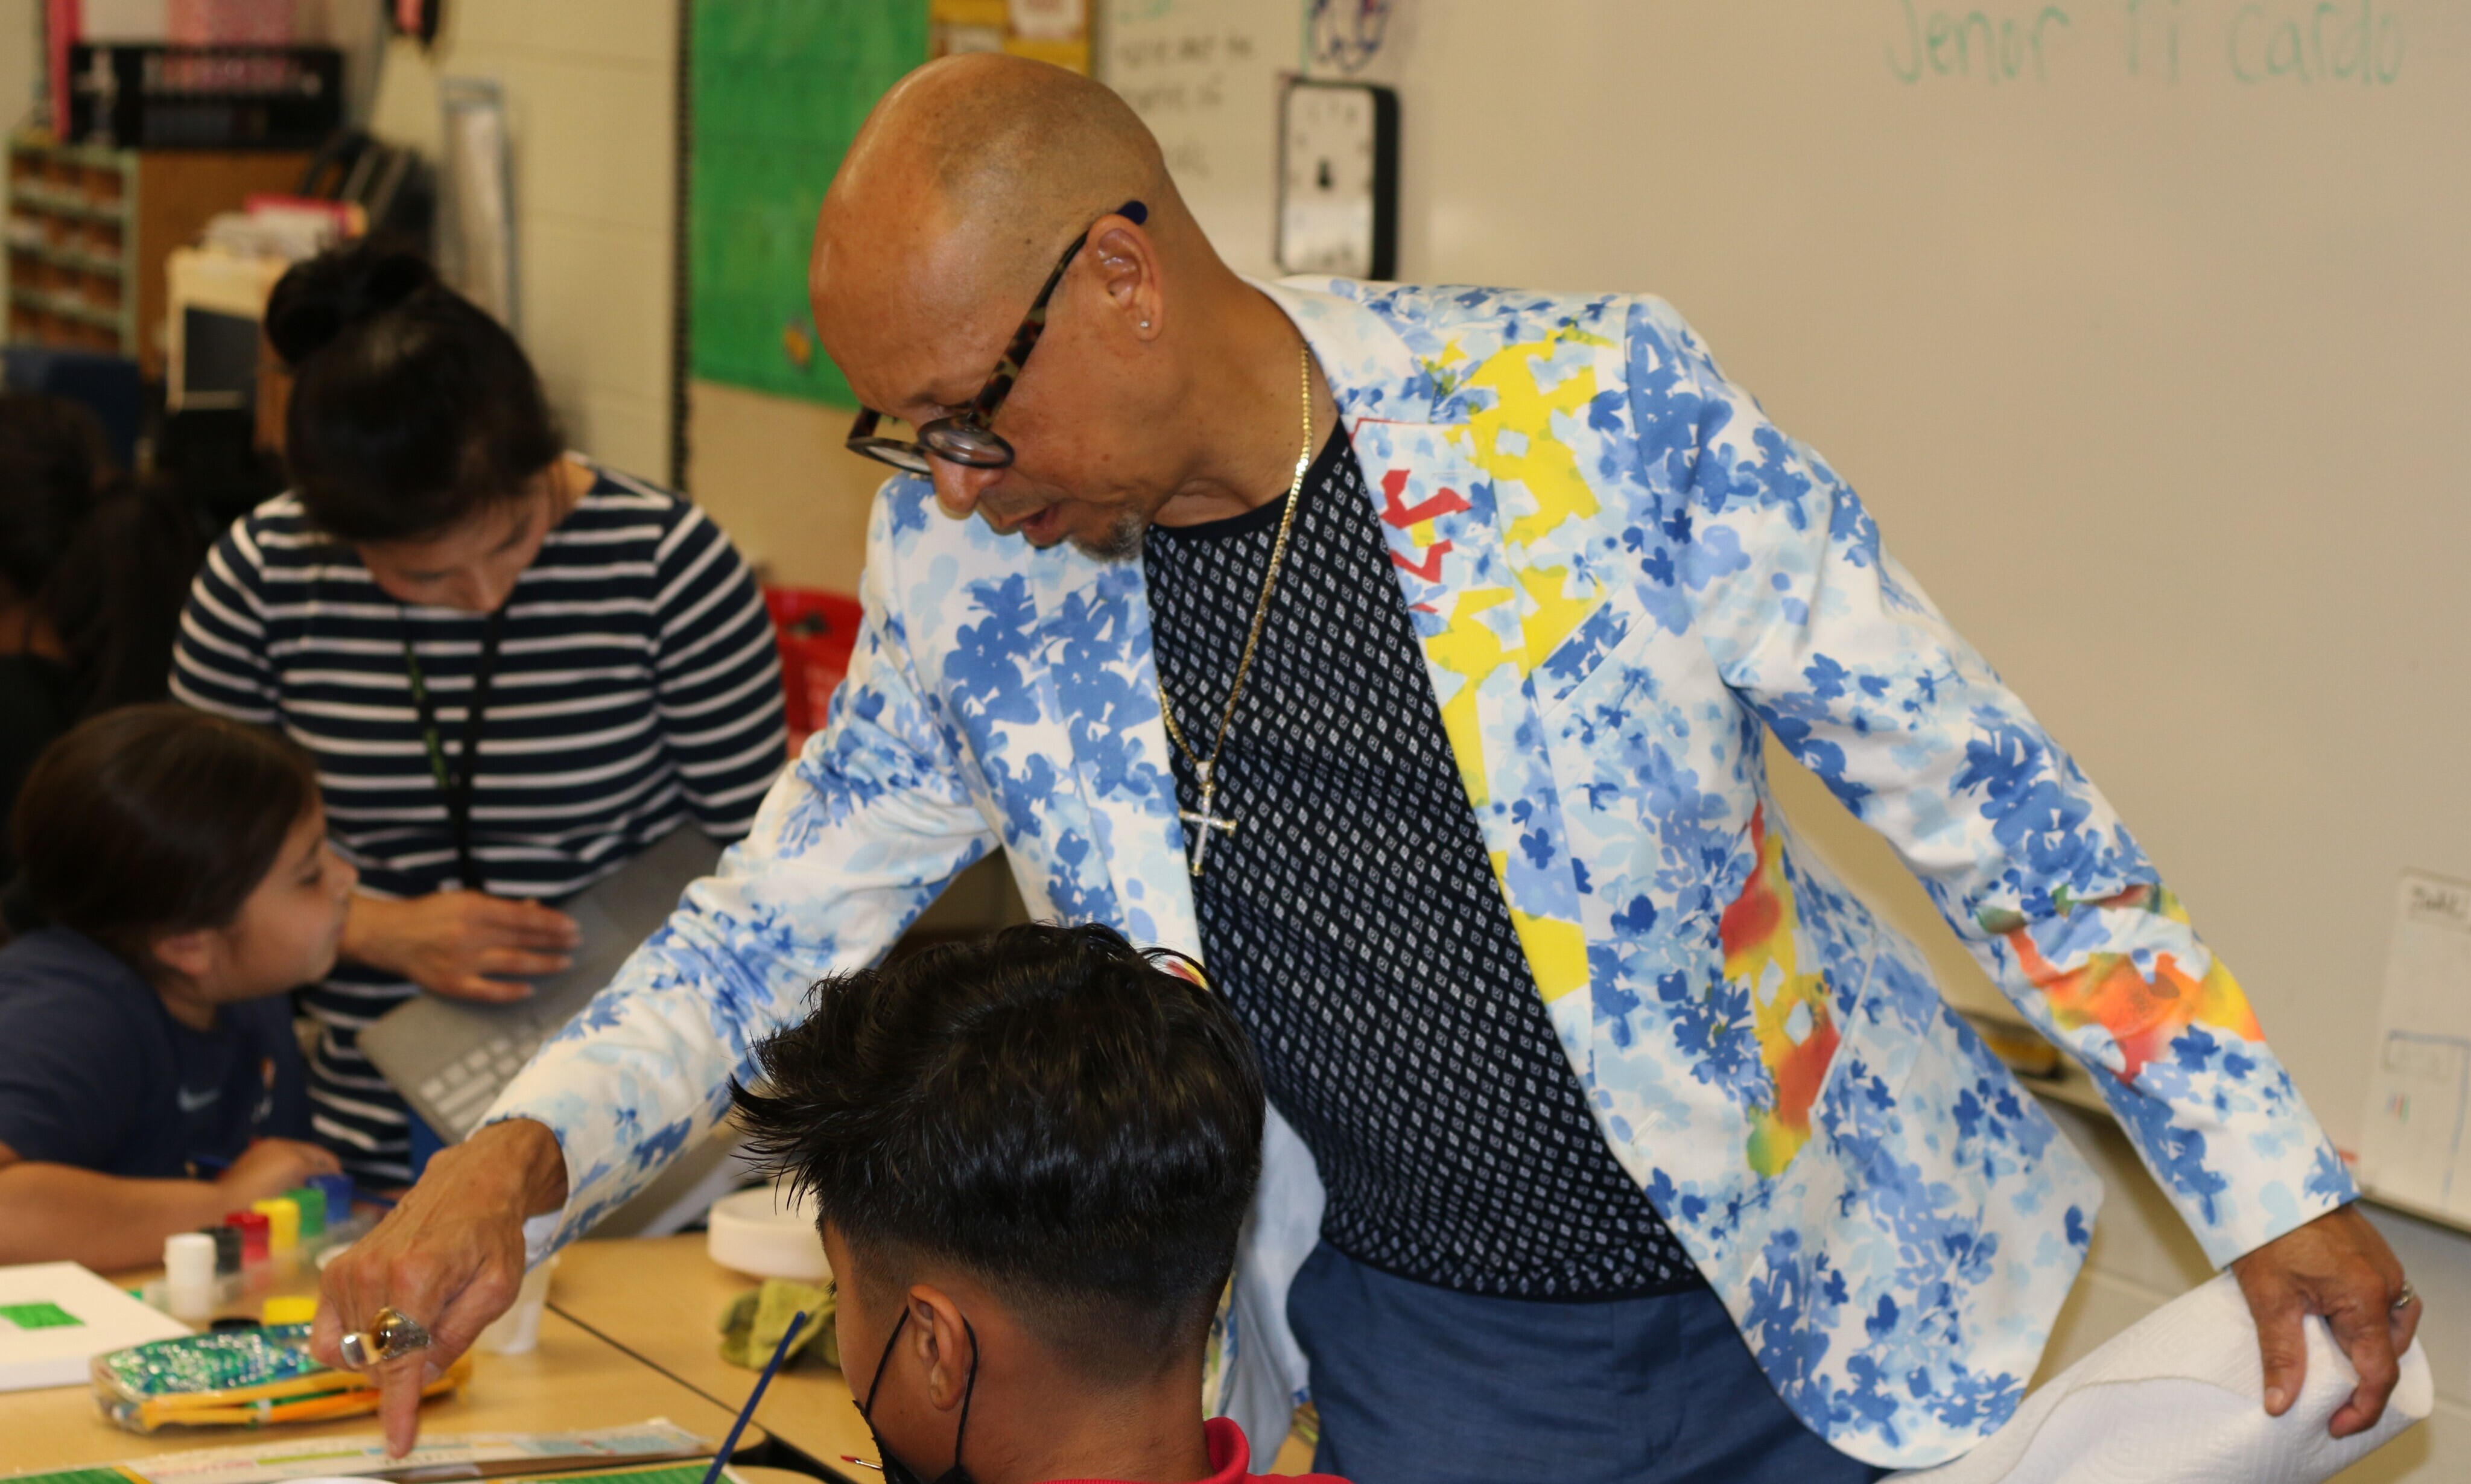 Erick Picardo was busy visiting students and giving advice as they worked on their art projects at César E. Chávez Elementary